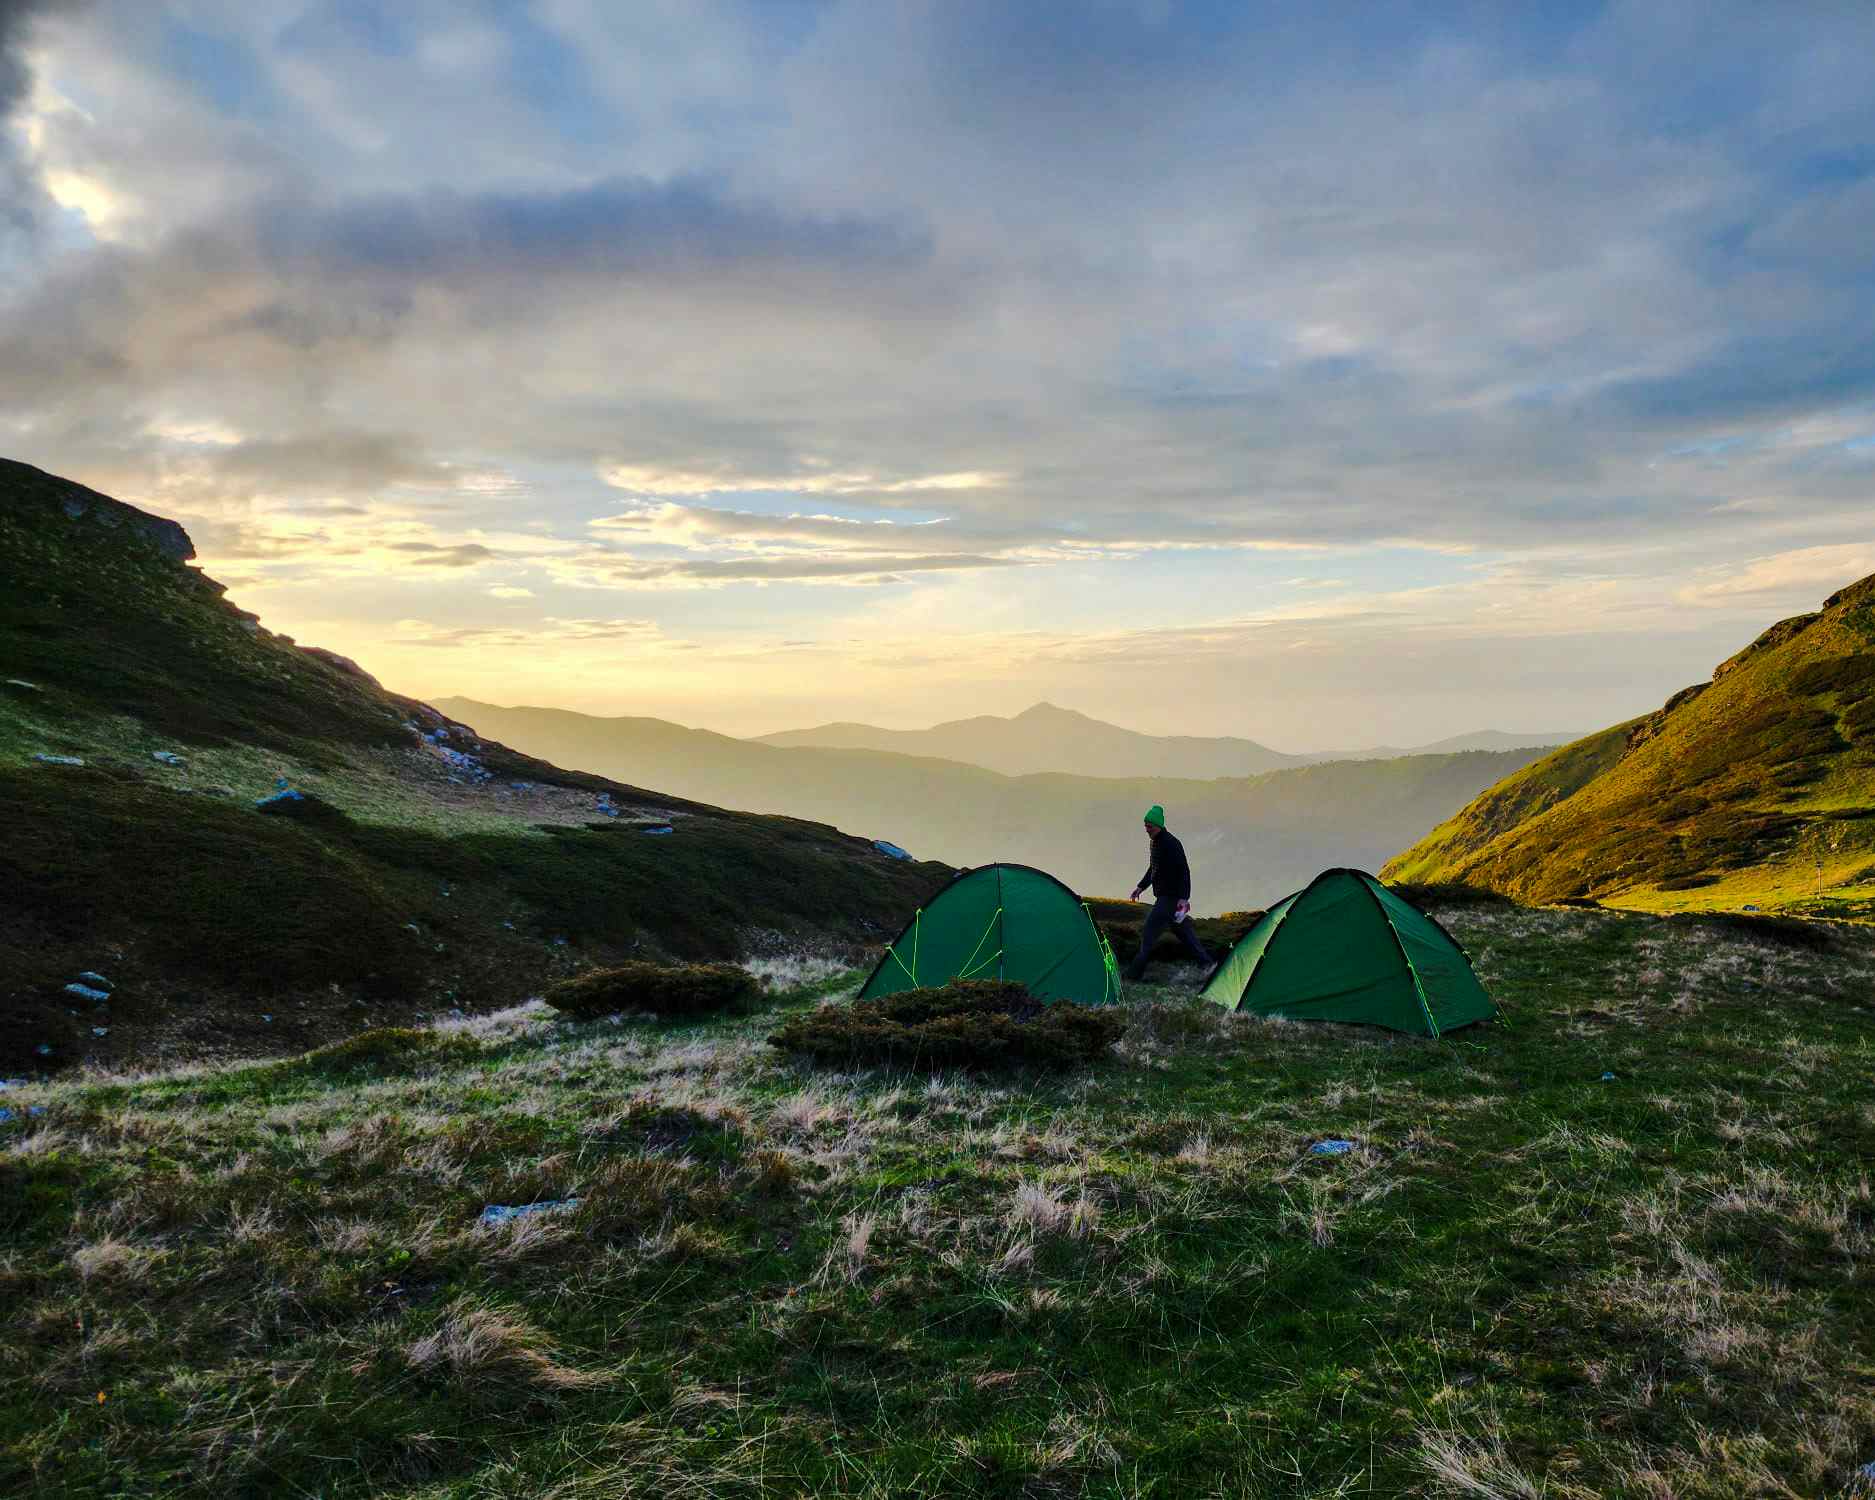 Camping at the foot of Guzhbaba peak, Kosovo. Photo: Host/Butterfly Outdoor Adventure